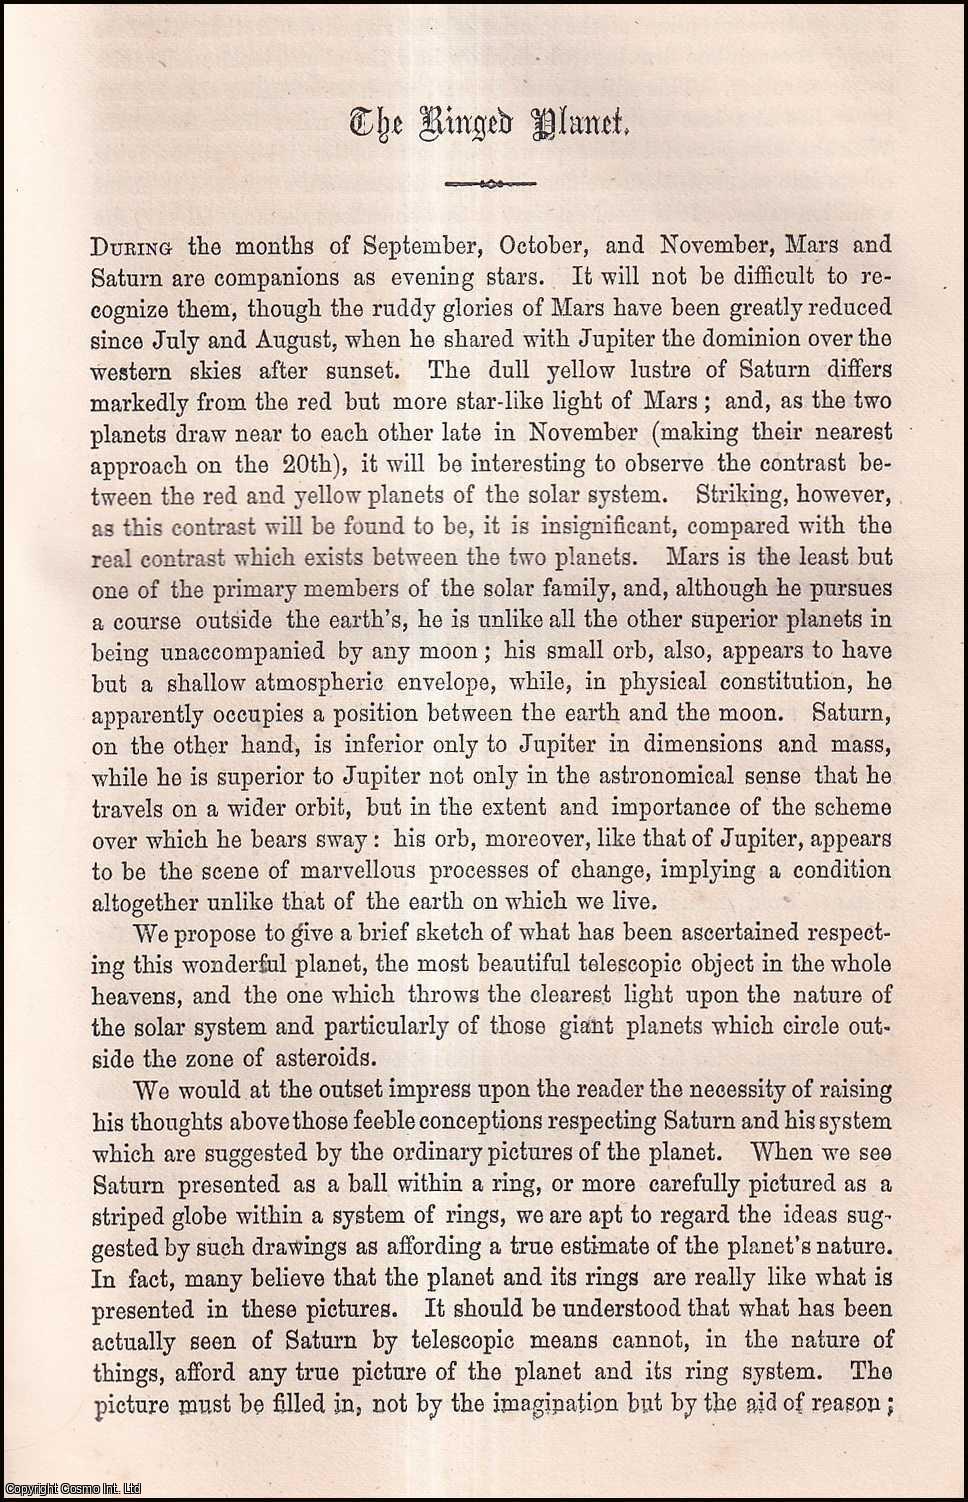 R.A. Proctor - Astronomy. The Ringed Planet. An uncommon original article from the Cornhill Magazine, 1873.